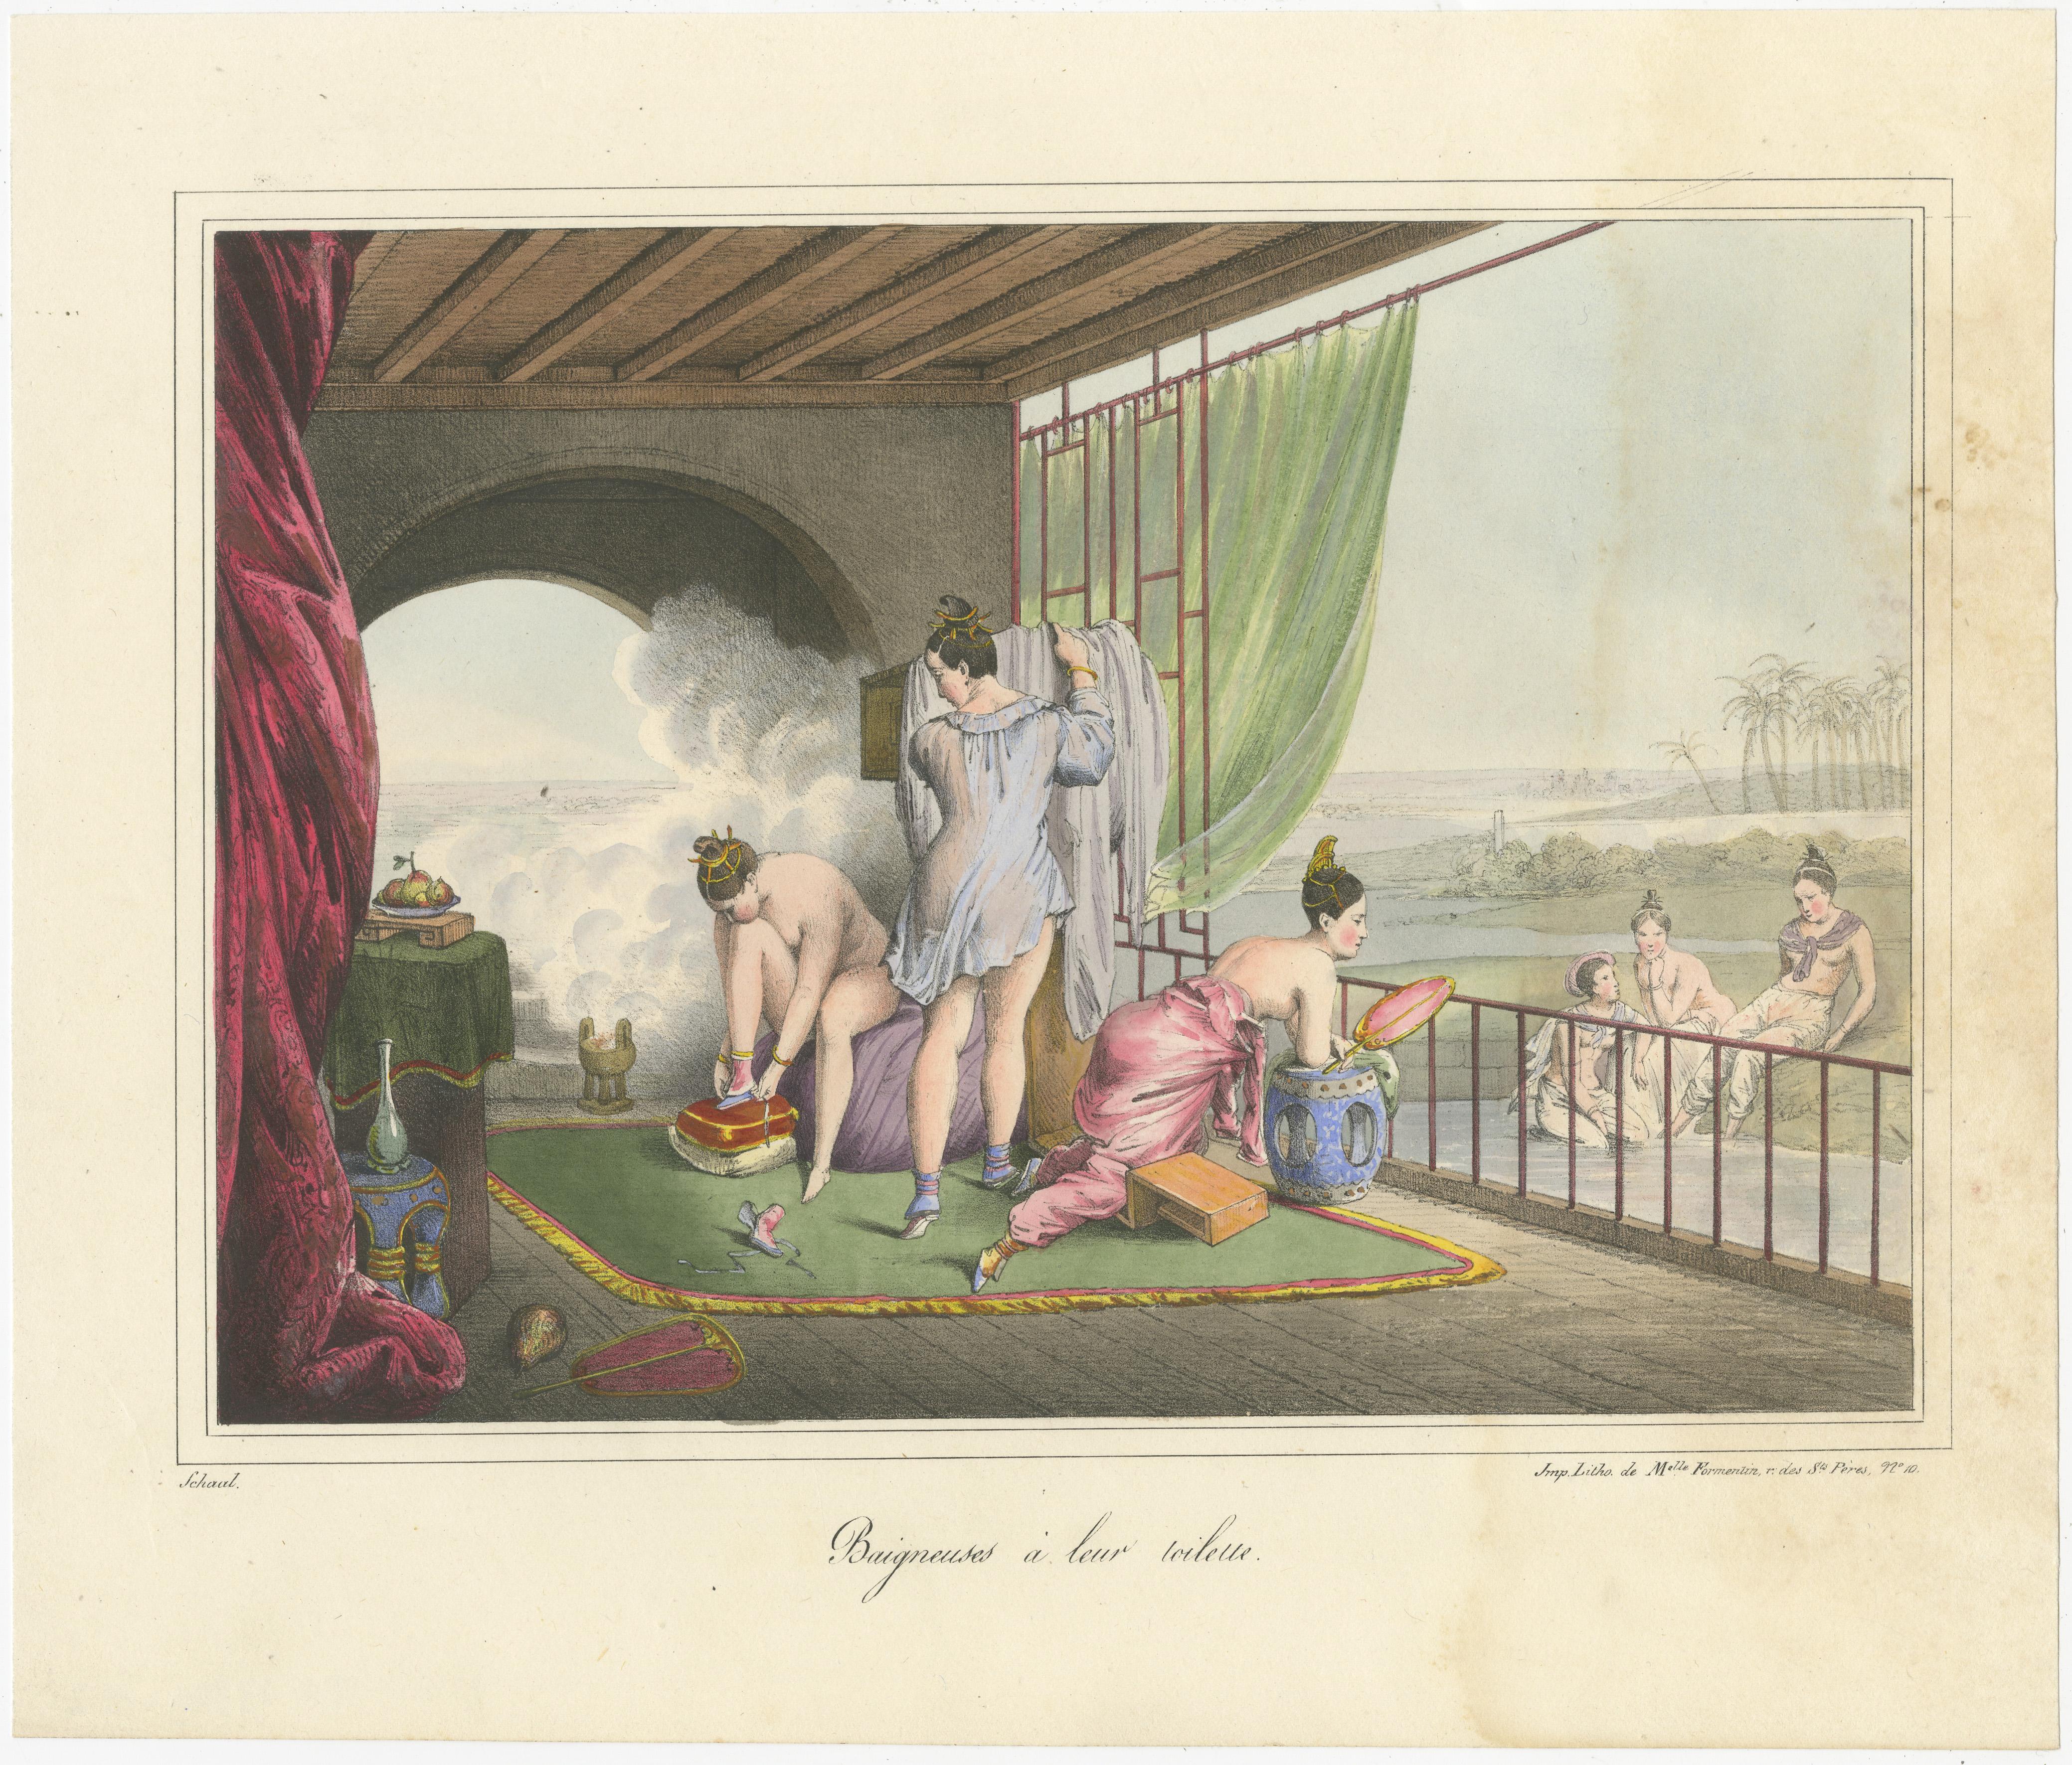 Antique print titled 'Baigneuses à leur toilette'. Print of Chinese bathing women. Published by Formentin & Cie, circa 1830.